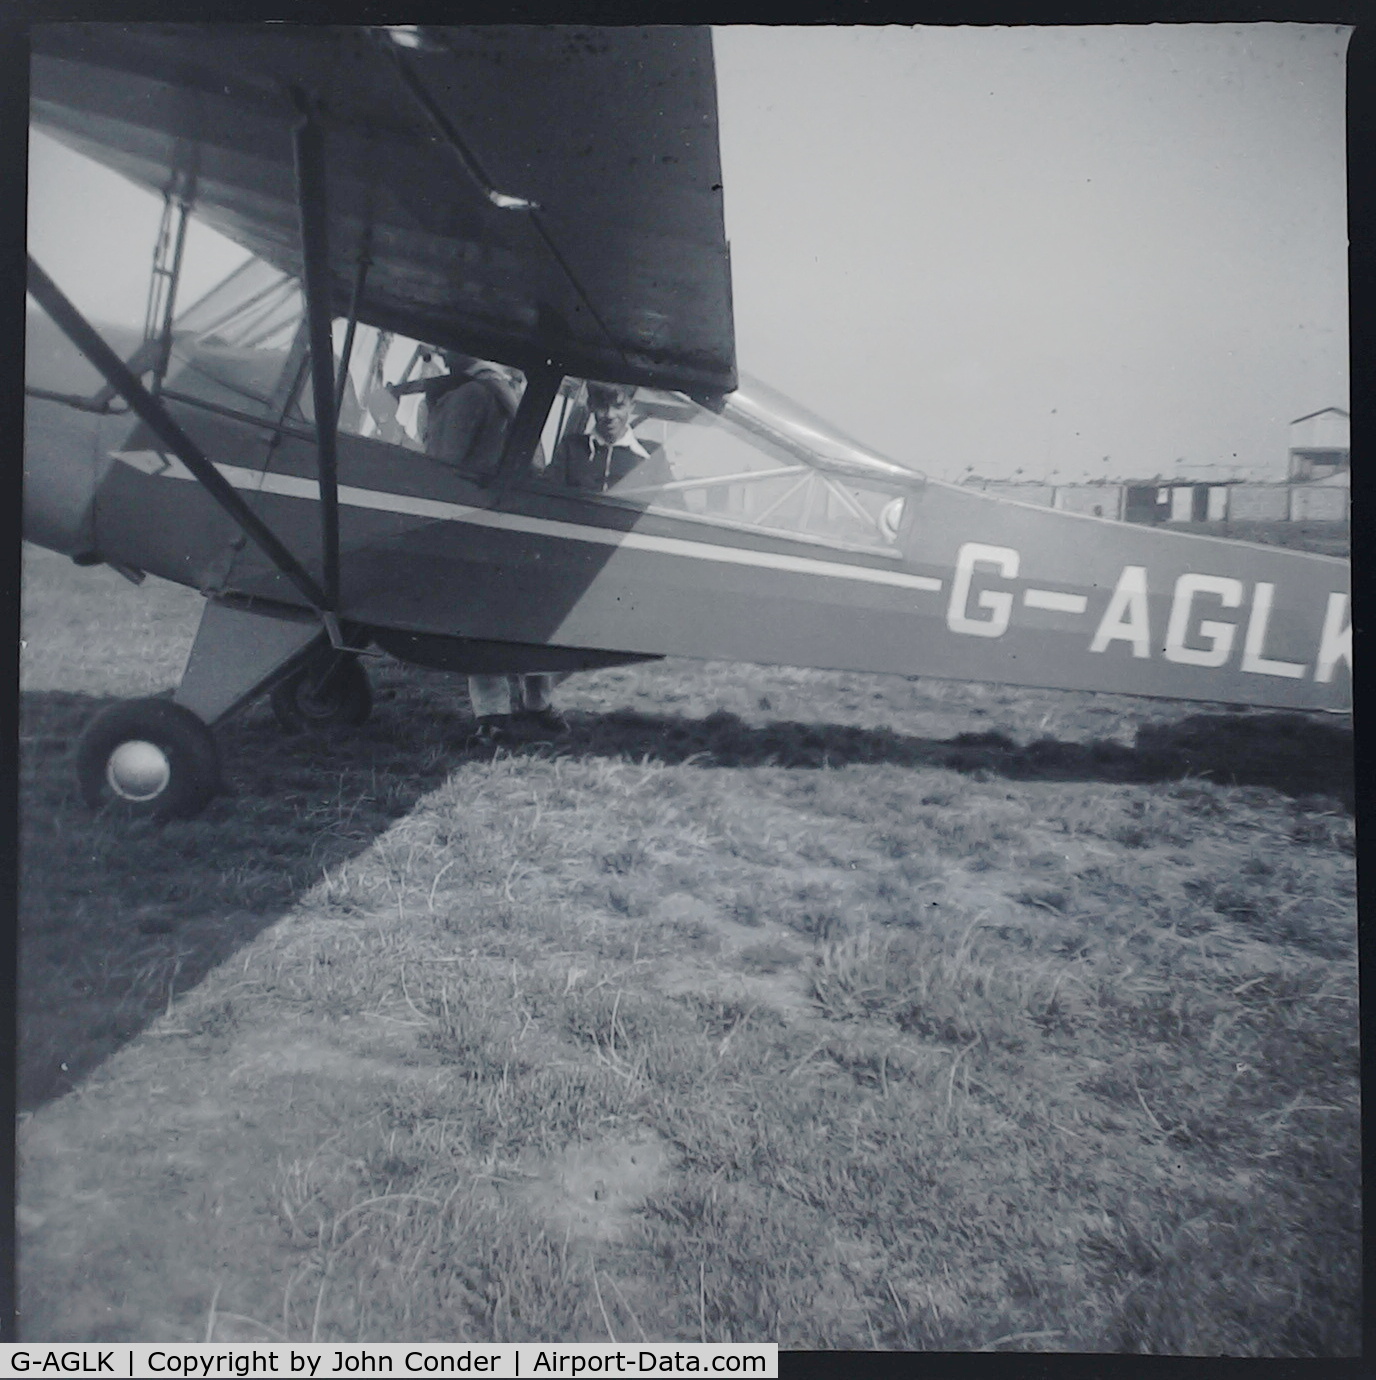 G-AGLK, 1944 Taylorcraft J Auster 5 C/N 1137, From the archive of the Conder family of Milton, Cambridgeshire and found in a stack of negatives we were loaned to digitize for the village. I suspect it's local, but there's lots of potential grass strips locally so I can't confirm where it was taken.